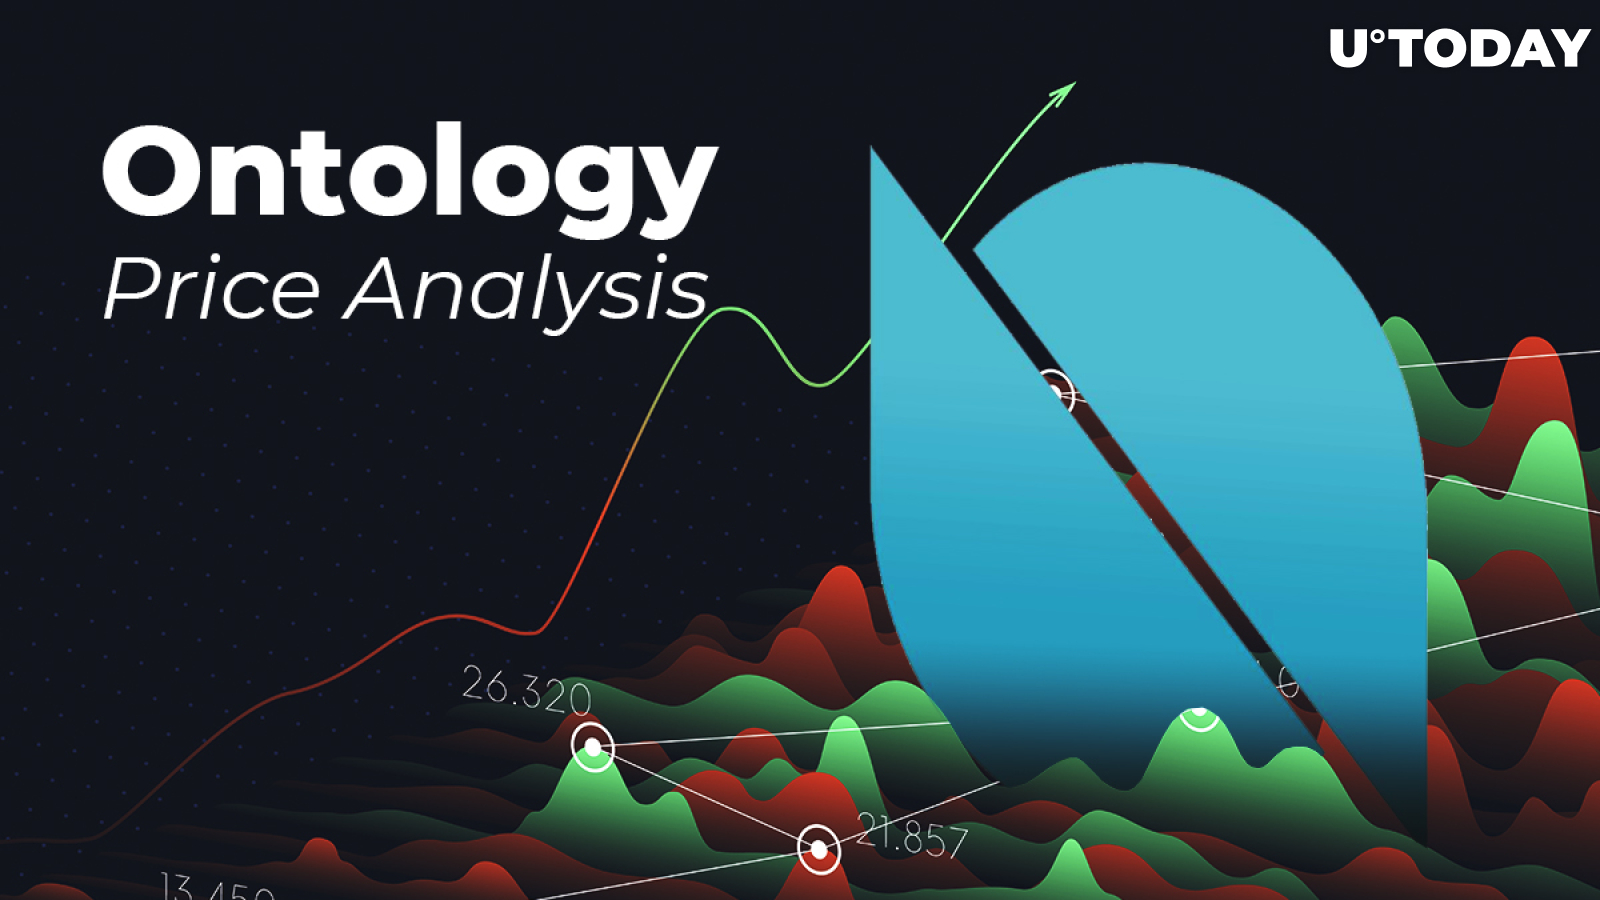 Ontology Price Analysis 2019-20-25 — How Much Will ONT Cost?